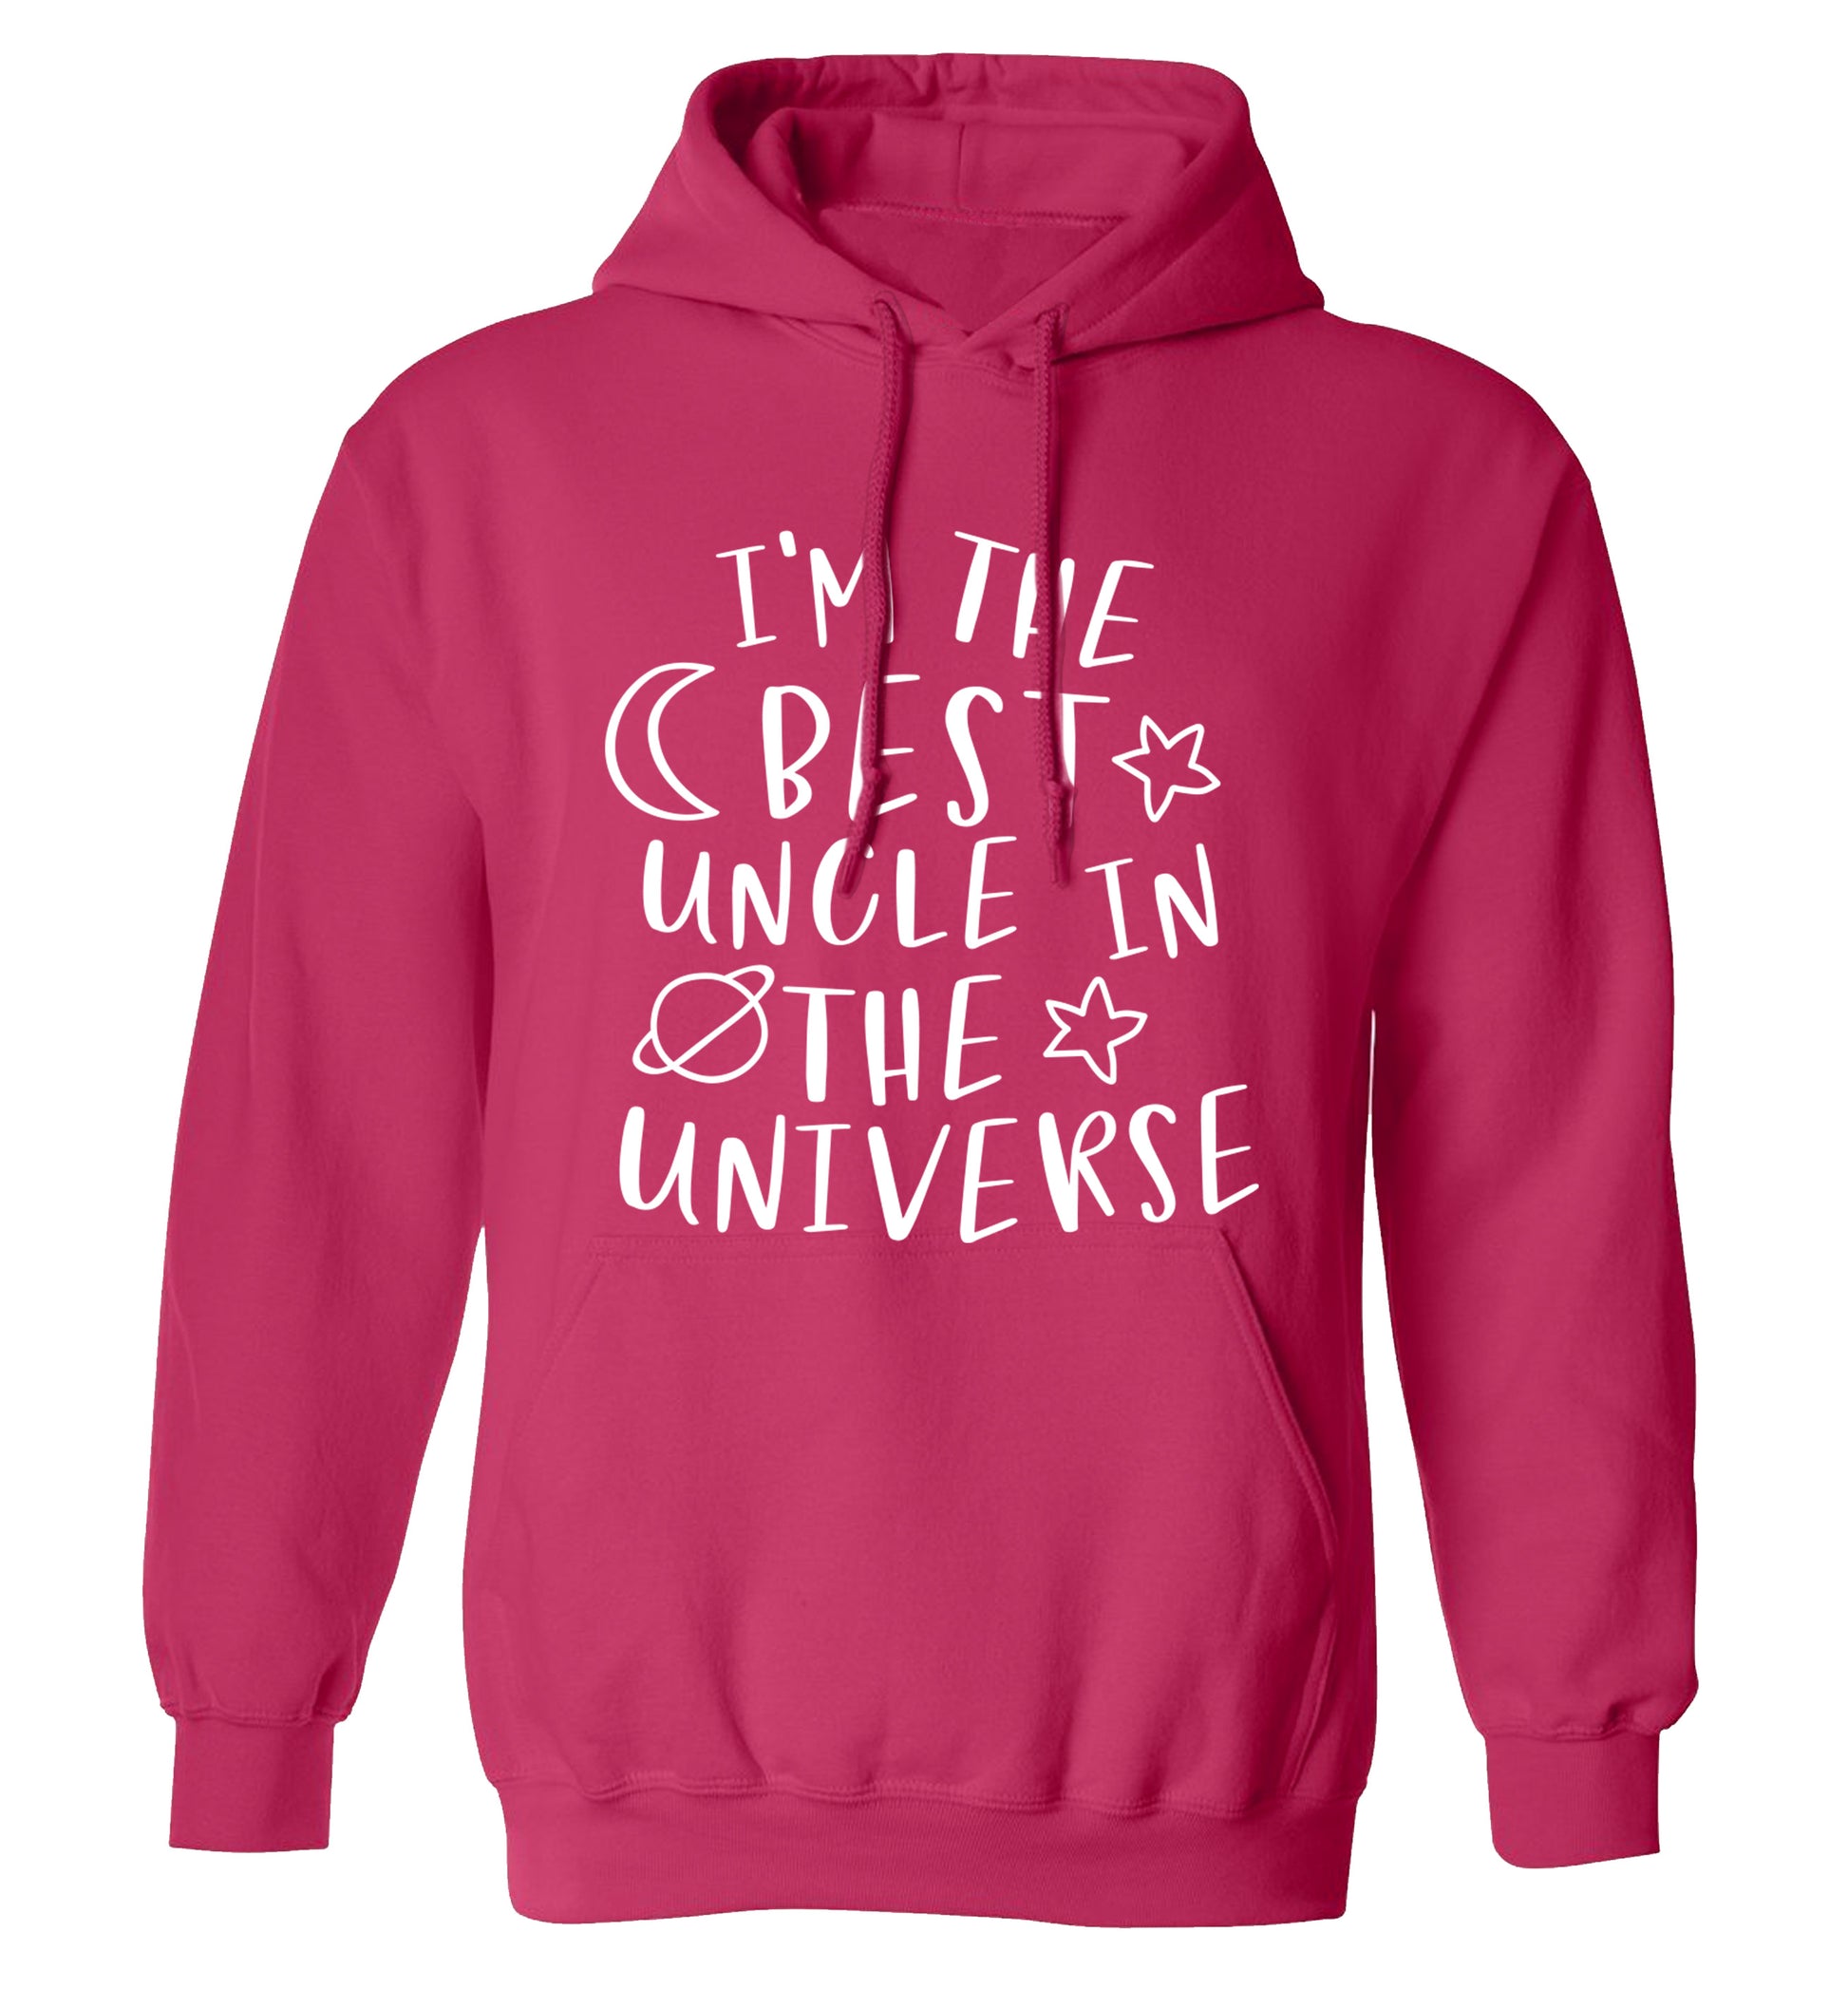 I'm the best uncle in the universe adults unisex pink hoodie 2XL